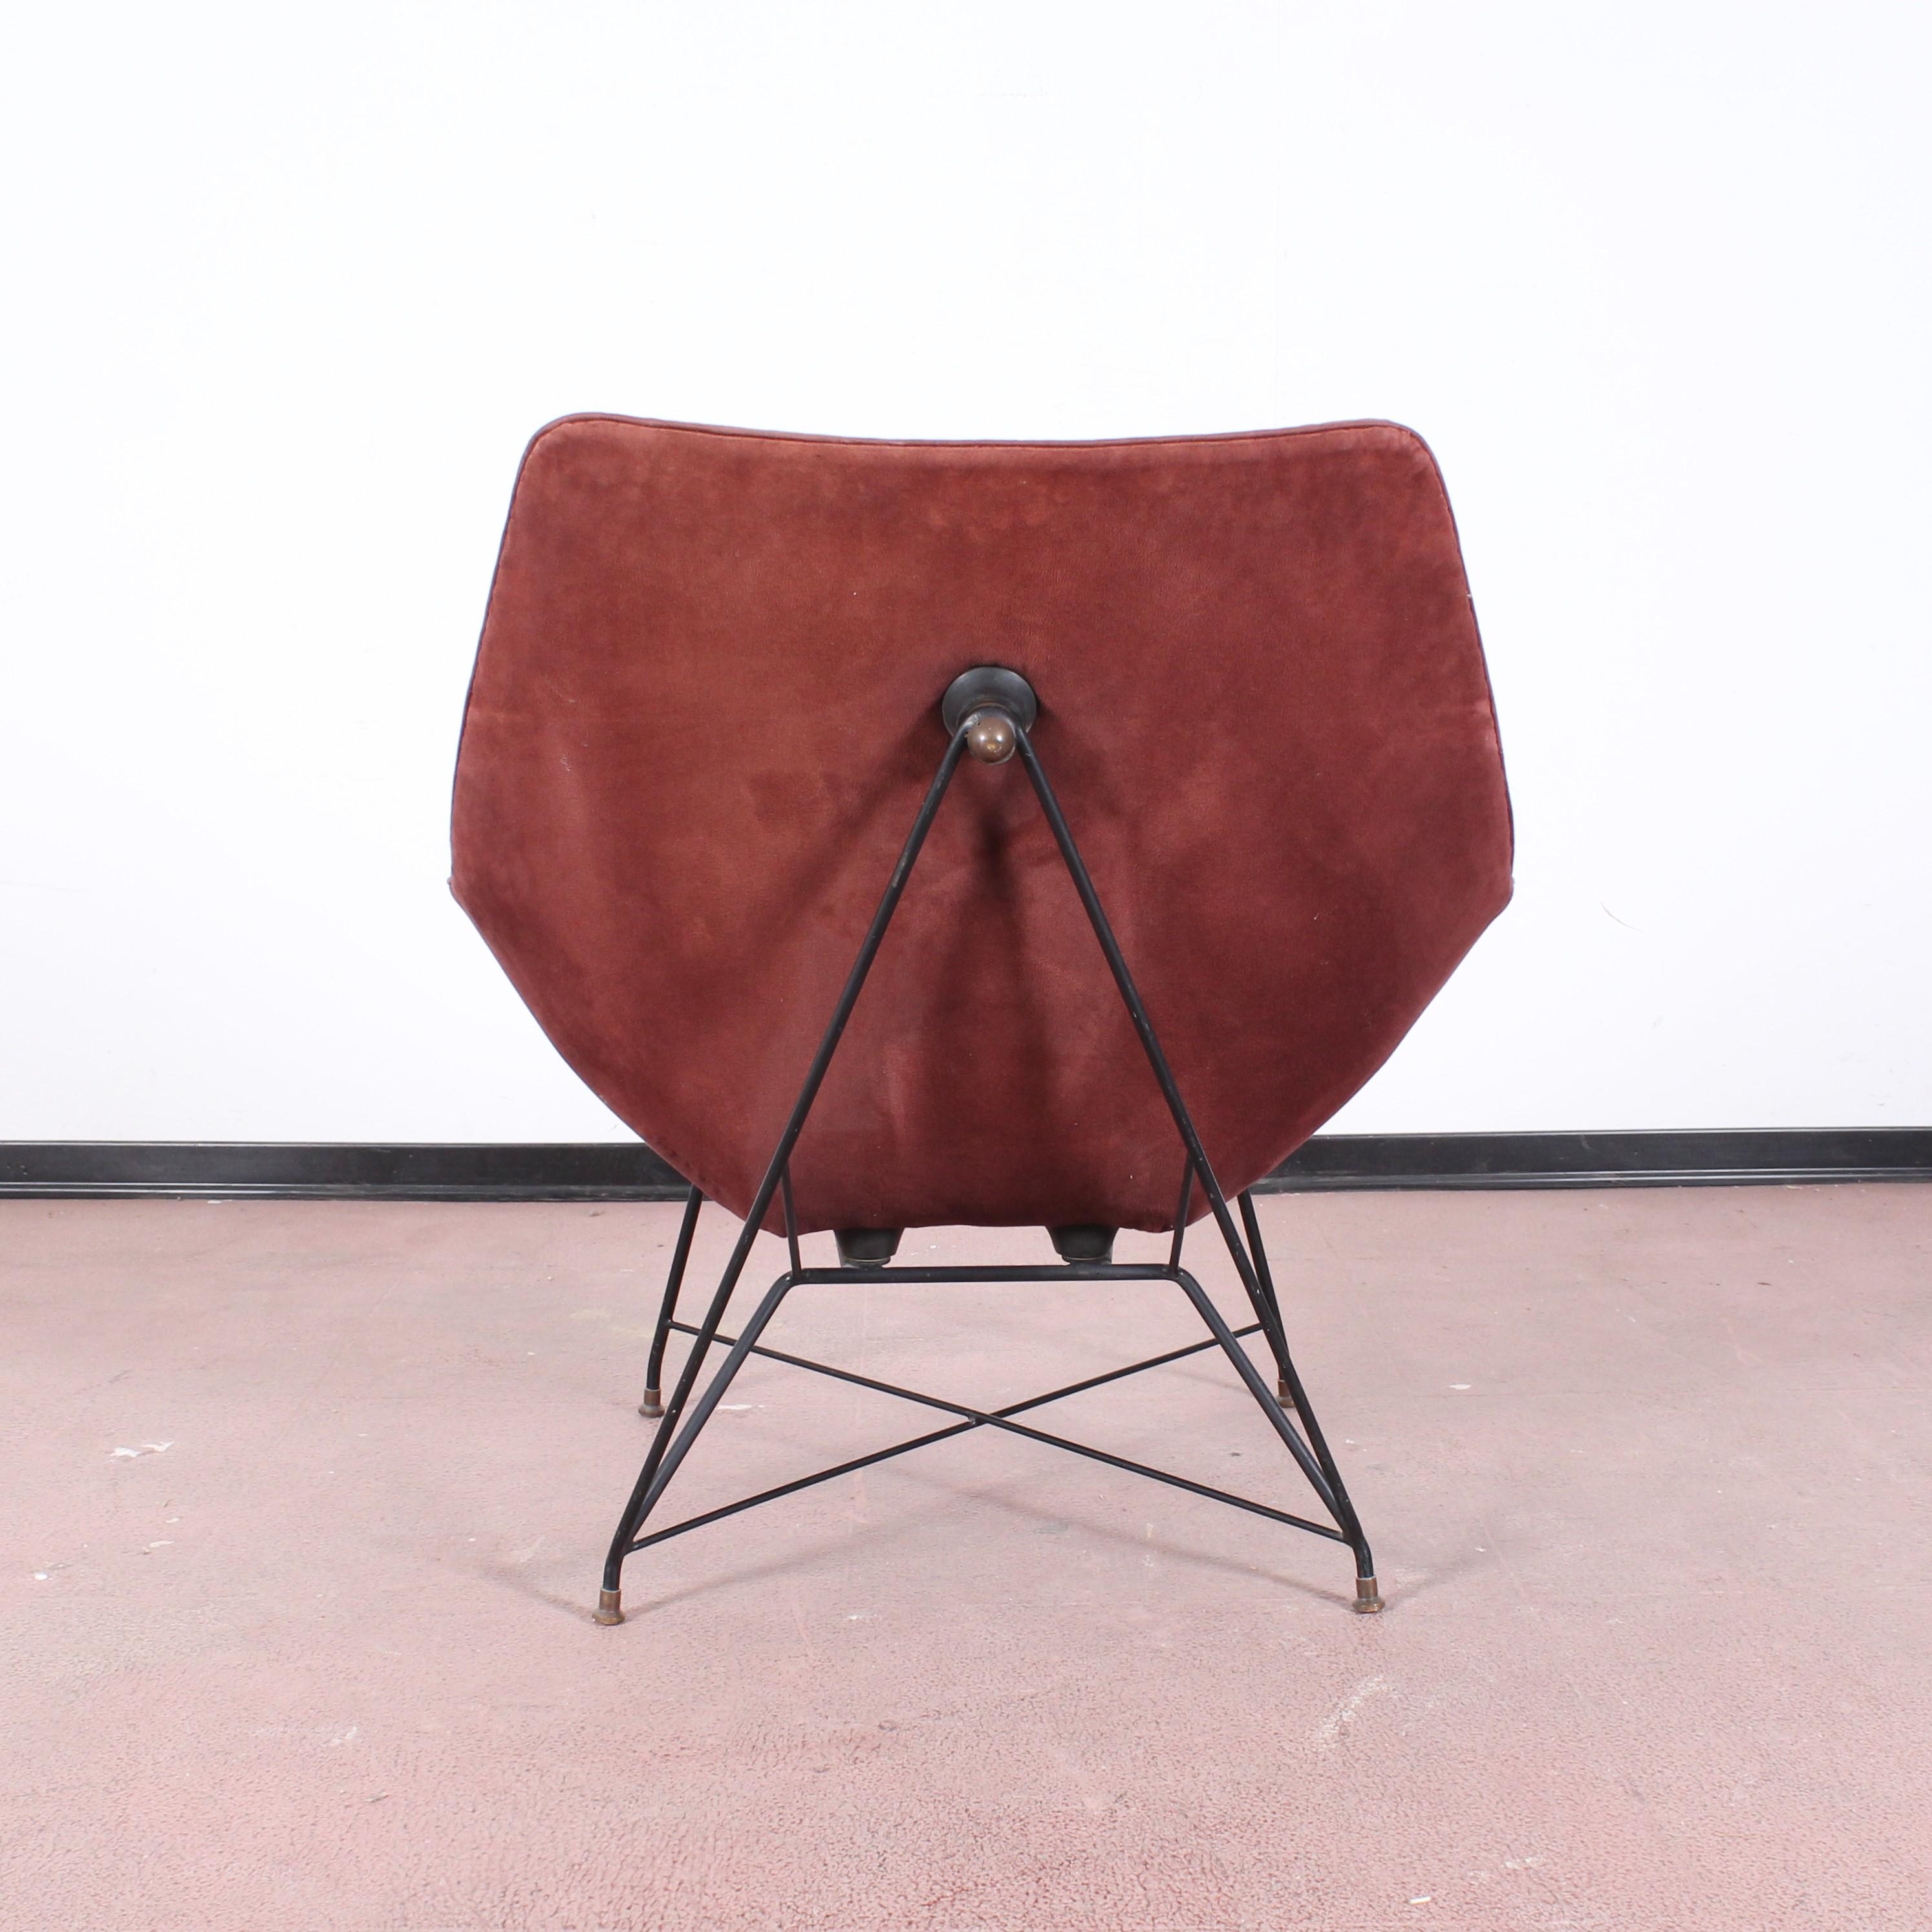 Mid-20th Century Midcentury Cosmos Armchair A. Bozzi for Saporiti, Plywood Metal and Velvet 1950s